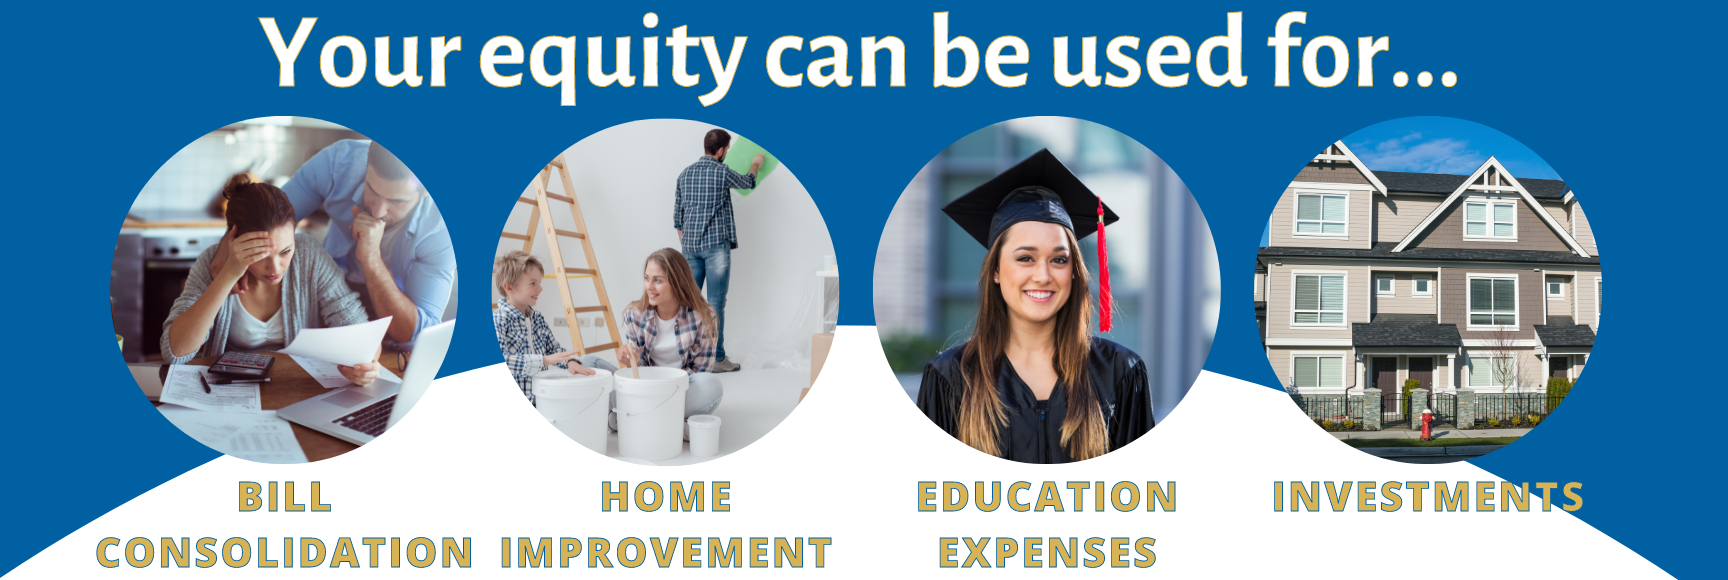 Image: your equity can be used for: